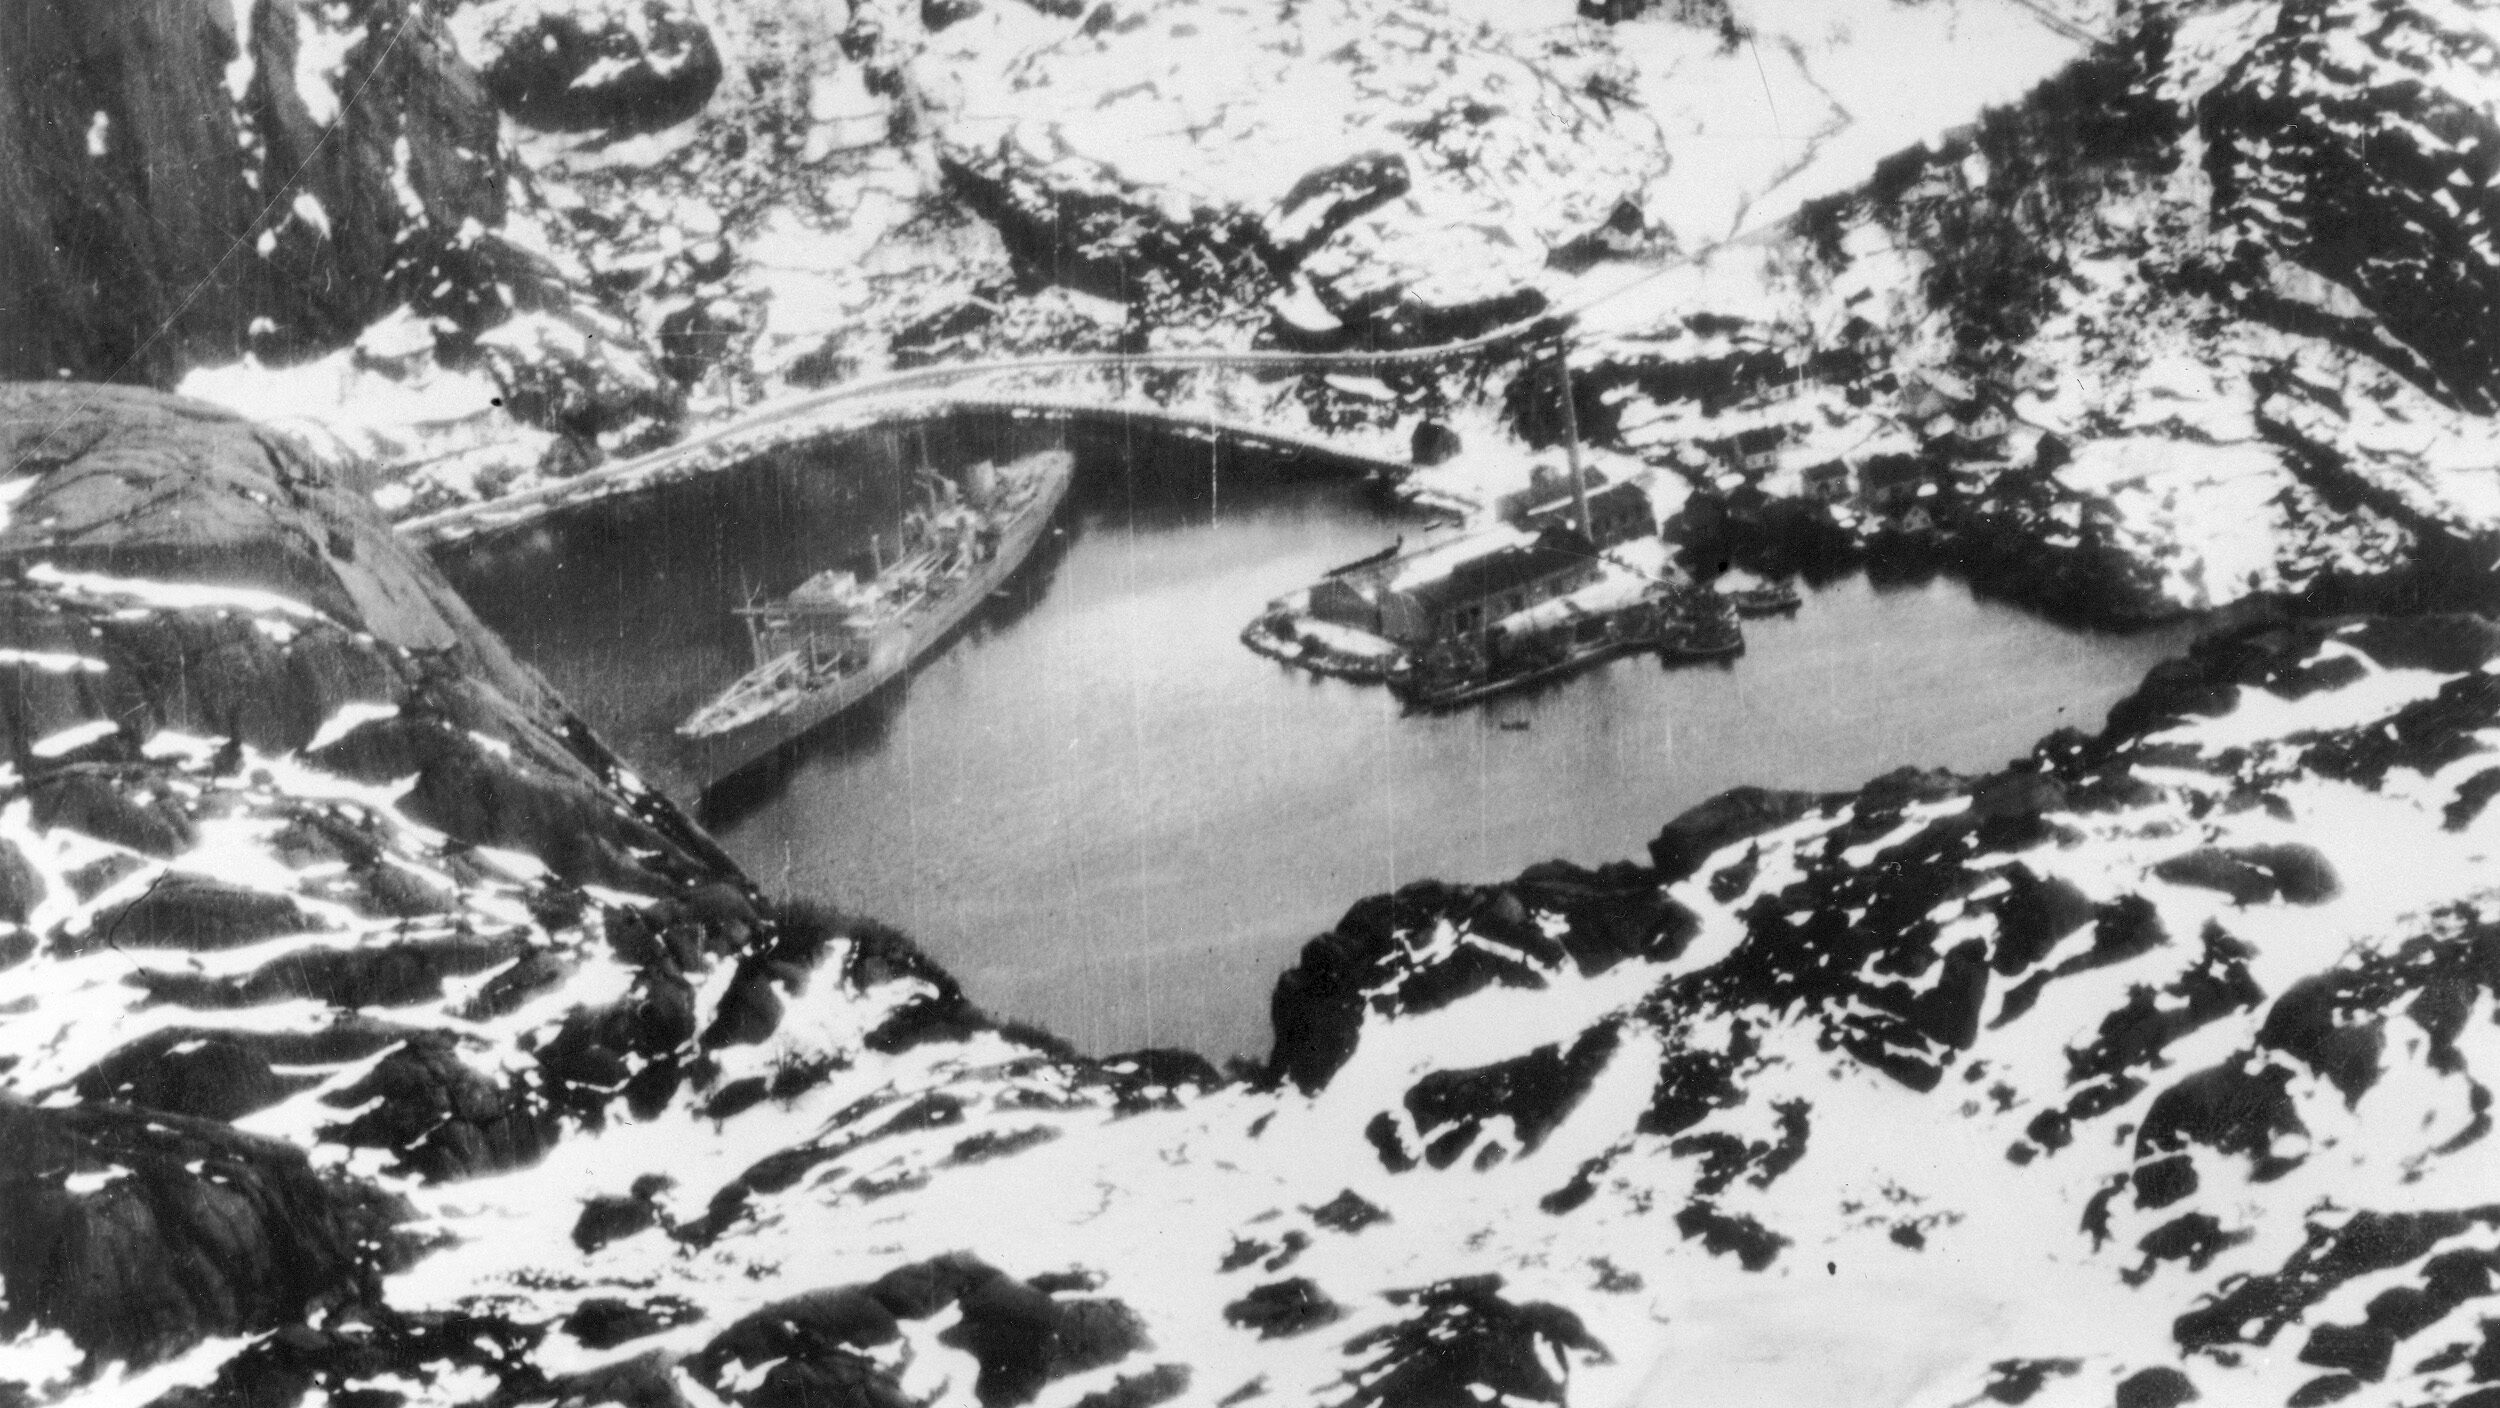 This aerial photo of the Altmark hiding in Norway’s Jossing Fjord led to the raid by Captain Philip Vian and the destroyer HMS Cossack.